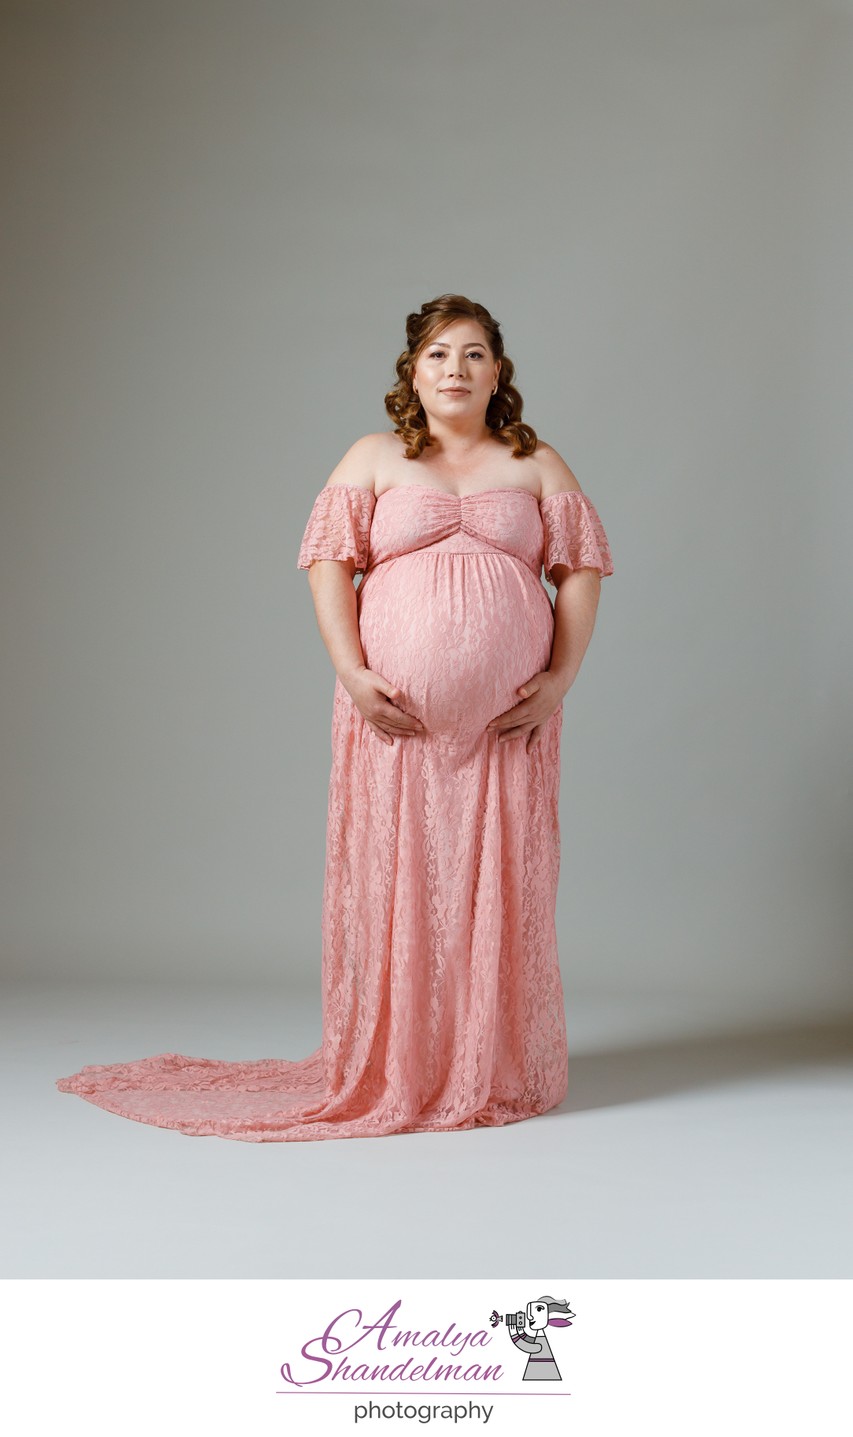 Elegant Maternity Portraits for Expecting Mothers